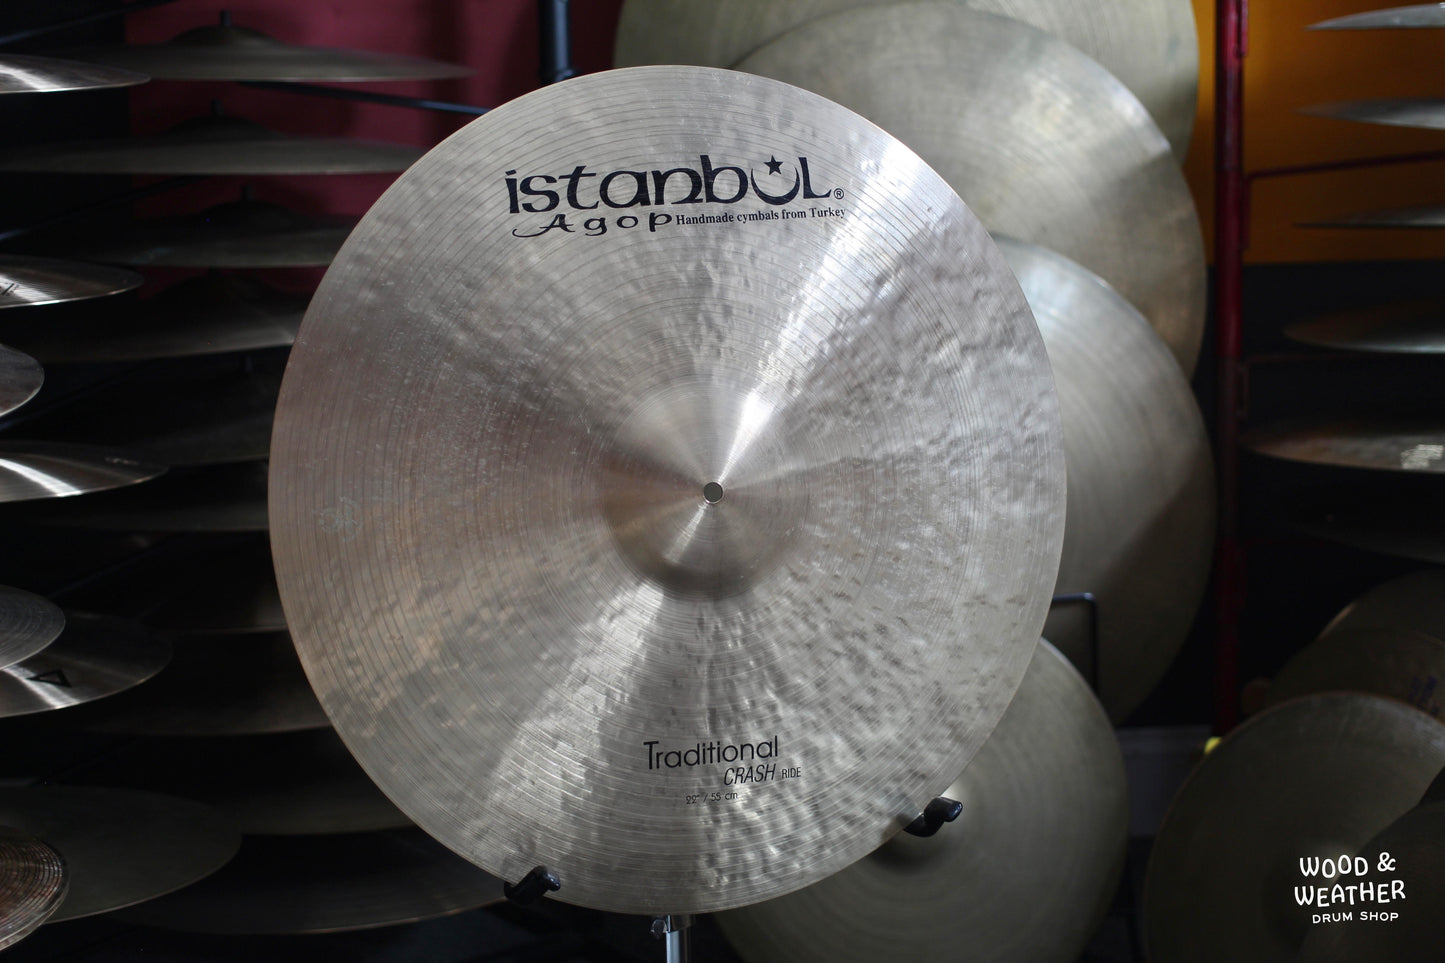 Used Istanbul Agop 22" Traditional Crash Ride Cymbal 2546g